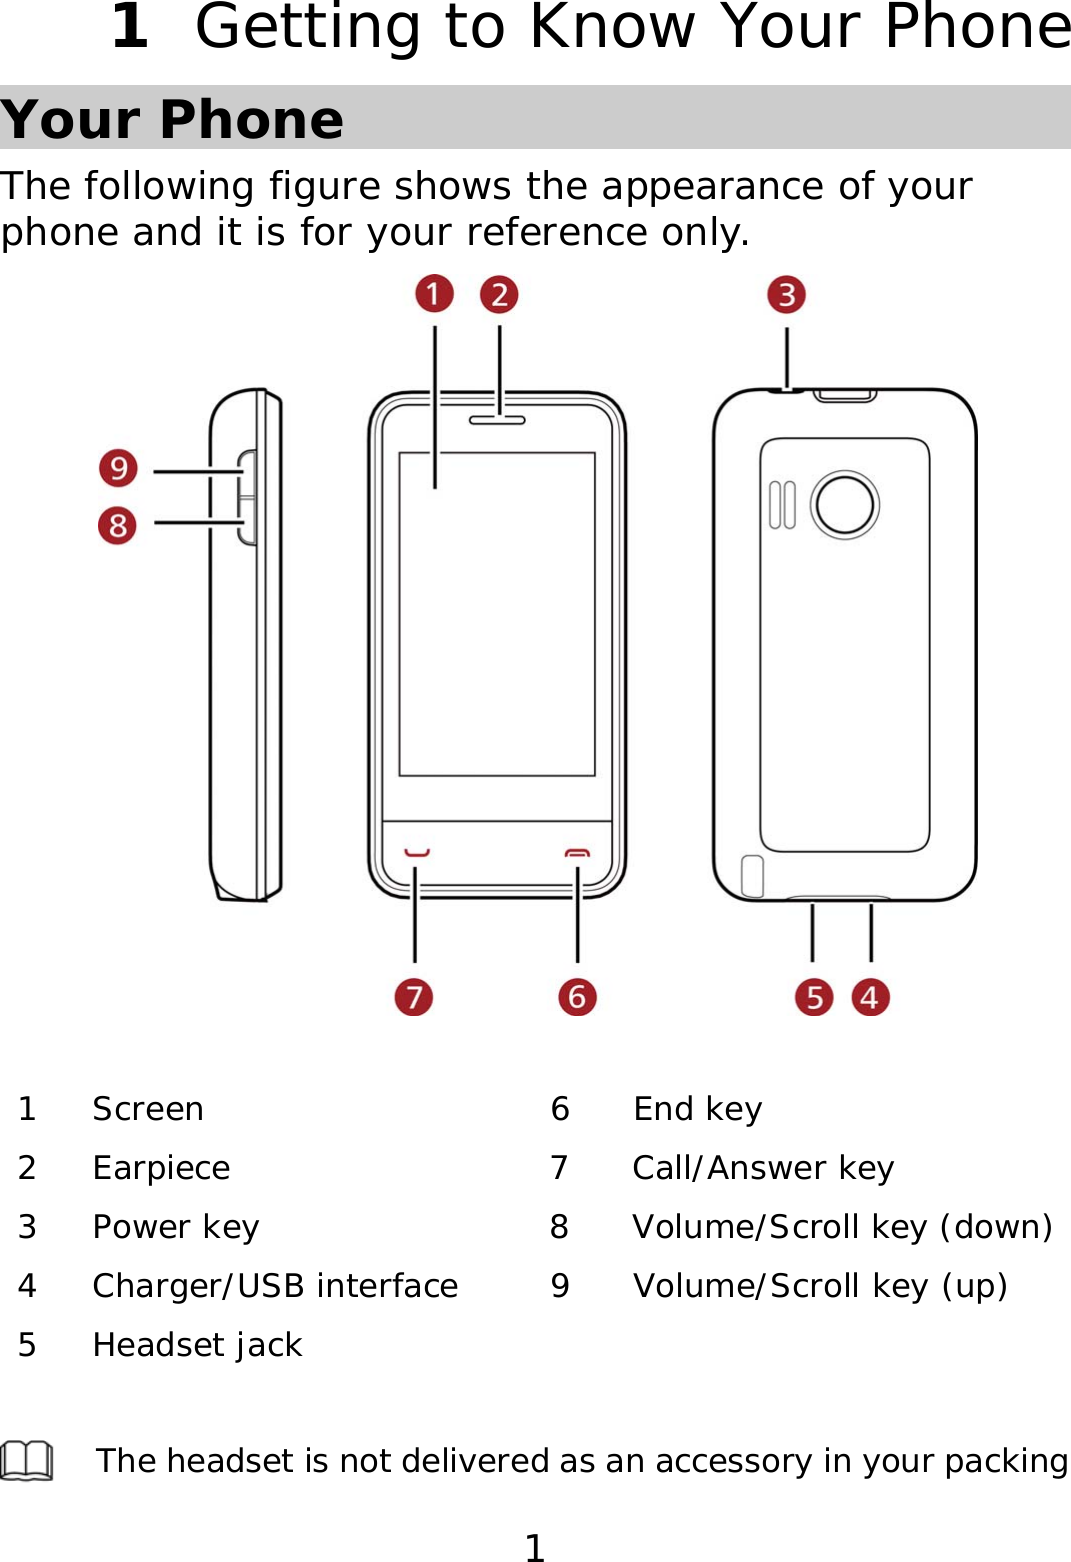 1 1  Getting to Know Your Phone Your Phone The following figure shows the appearance of your phone and it is for your reference only.    1 Screen  6  End key 2 Earpiece  7  Call/Answer key  3 Power key  8  Volume/Scroll key (down) 4  Charger/USB interface  9  Volume/Scroll key (up) 5 Headset jack        The headset is not delivered as an accessory in your packing 